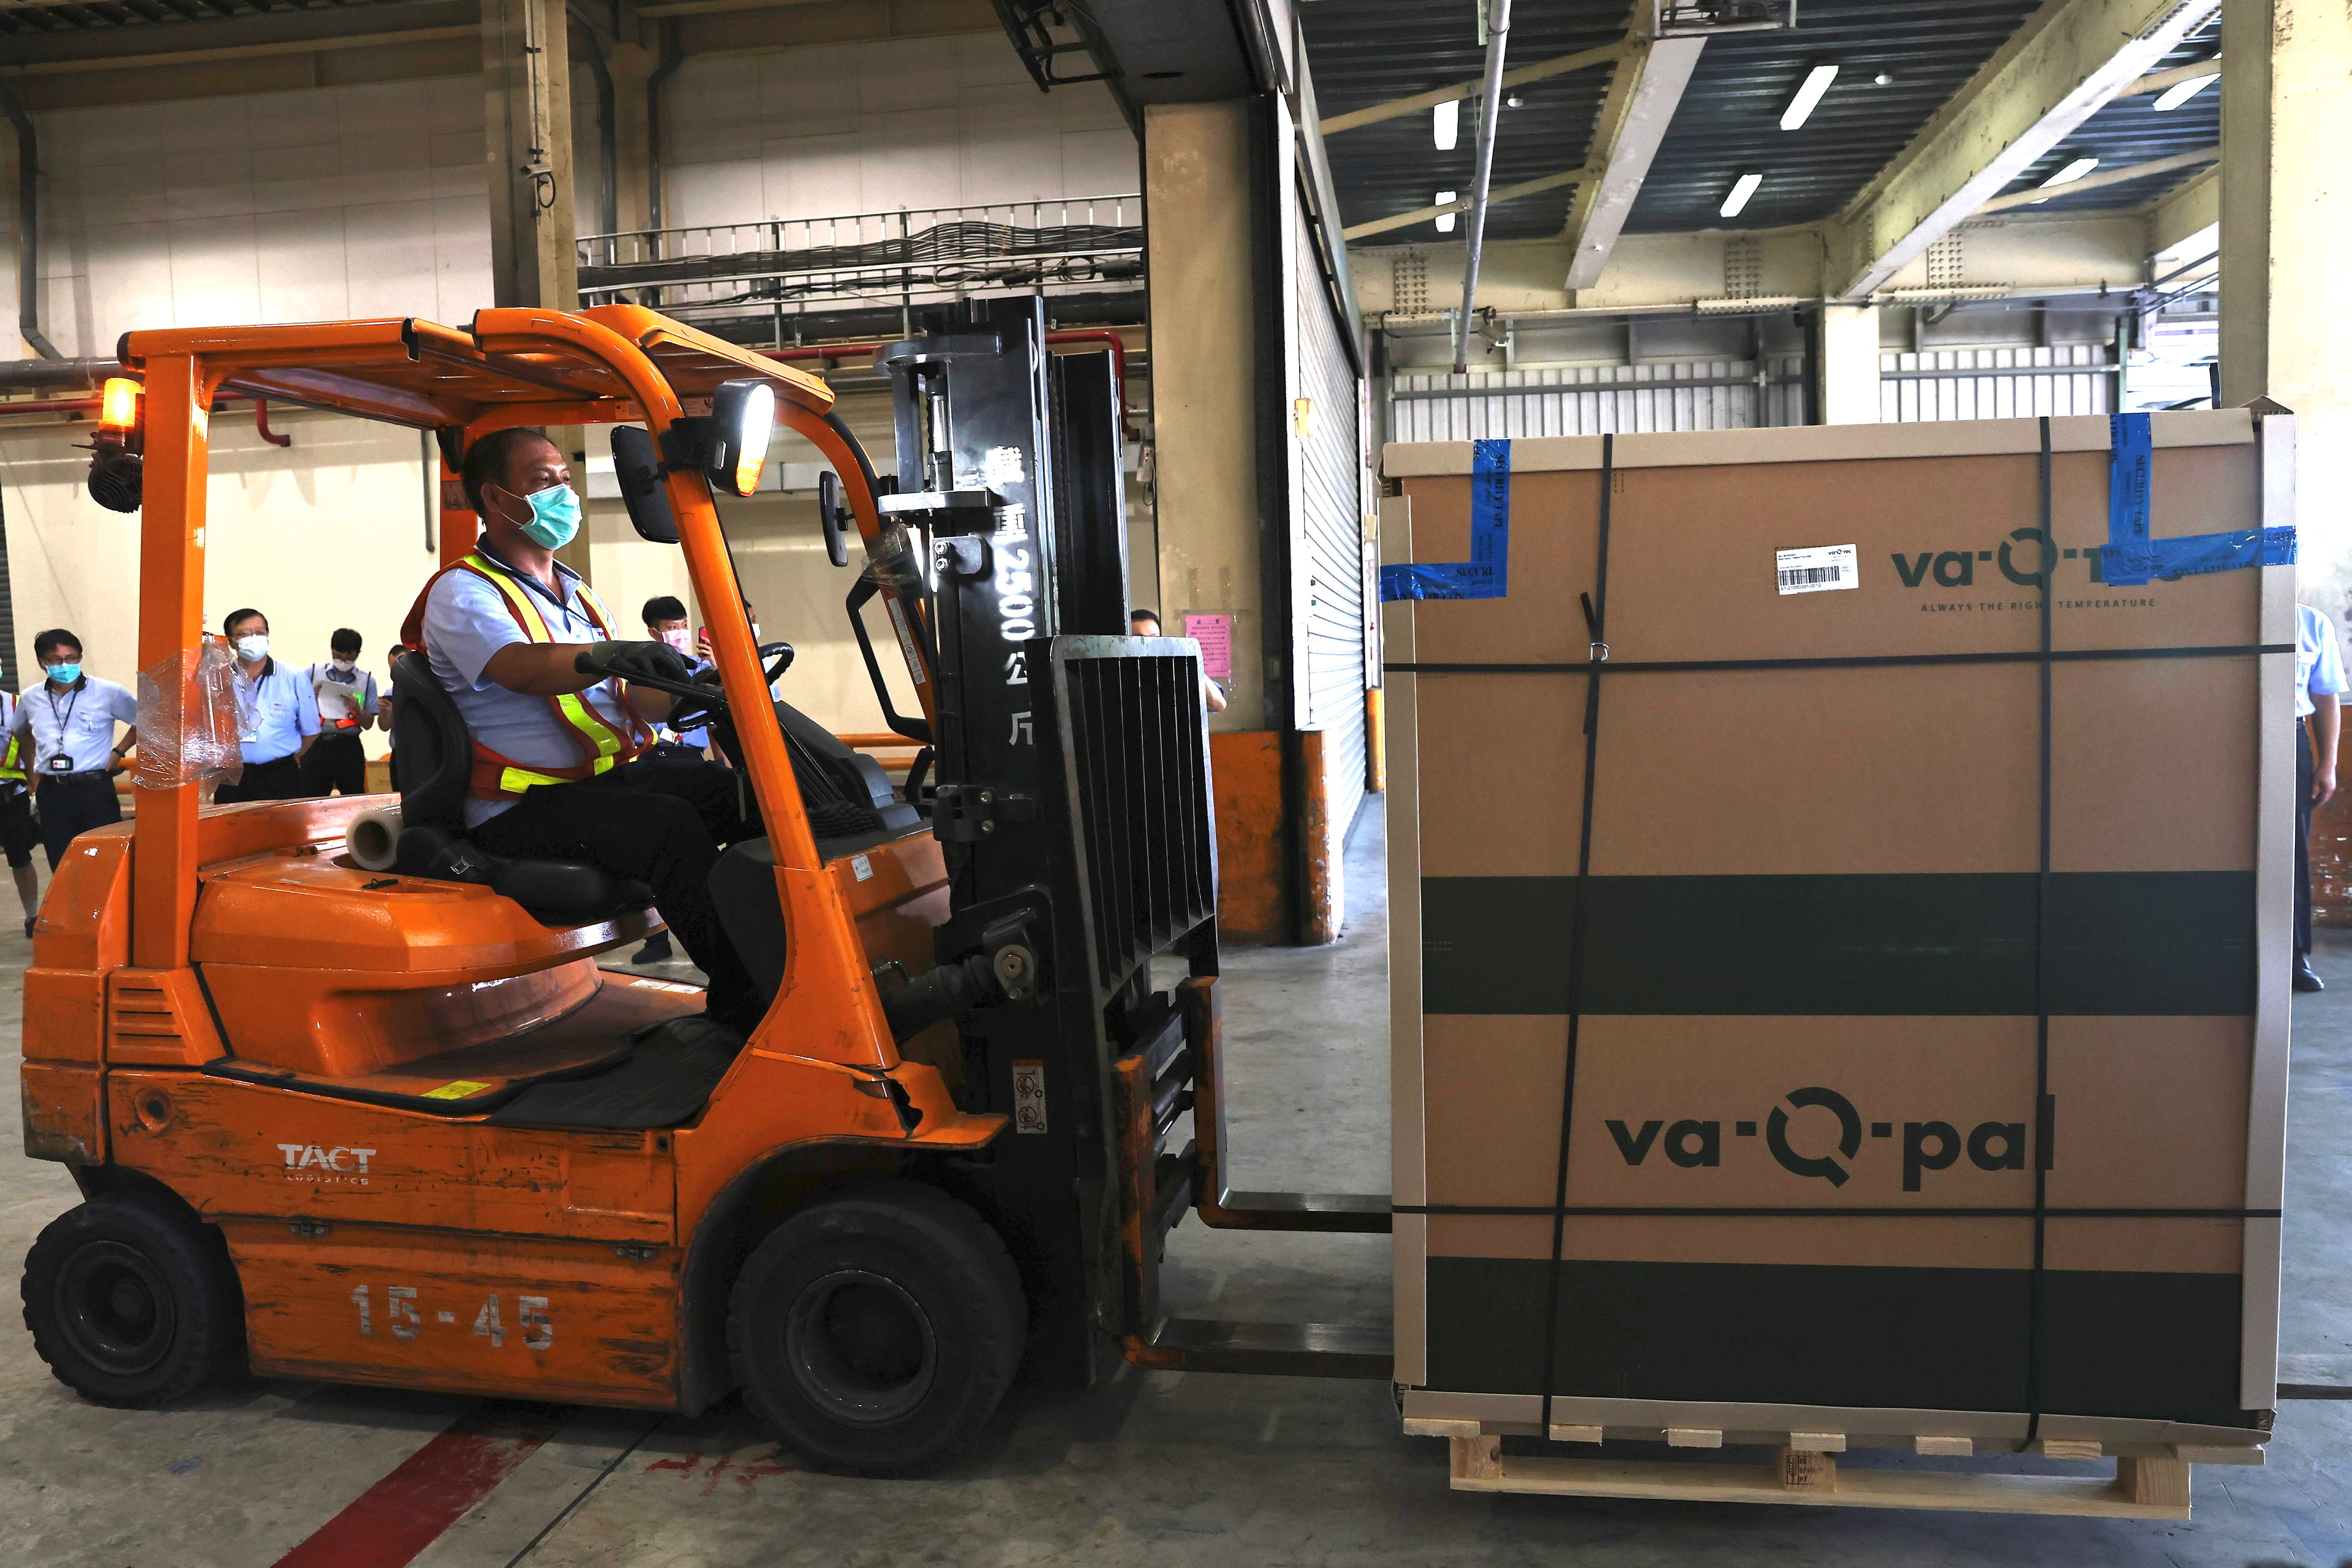 A worker operates a forklift to transport Moderna vaccines against the coronavirus disease